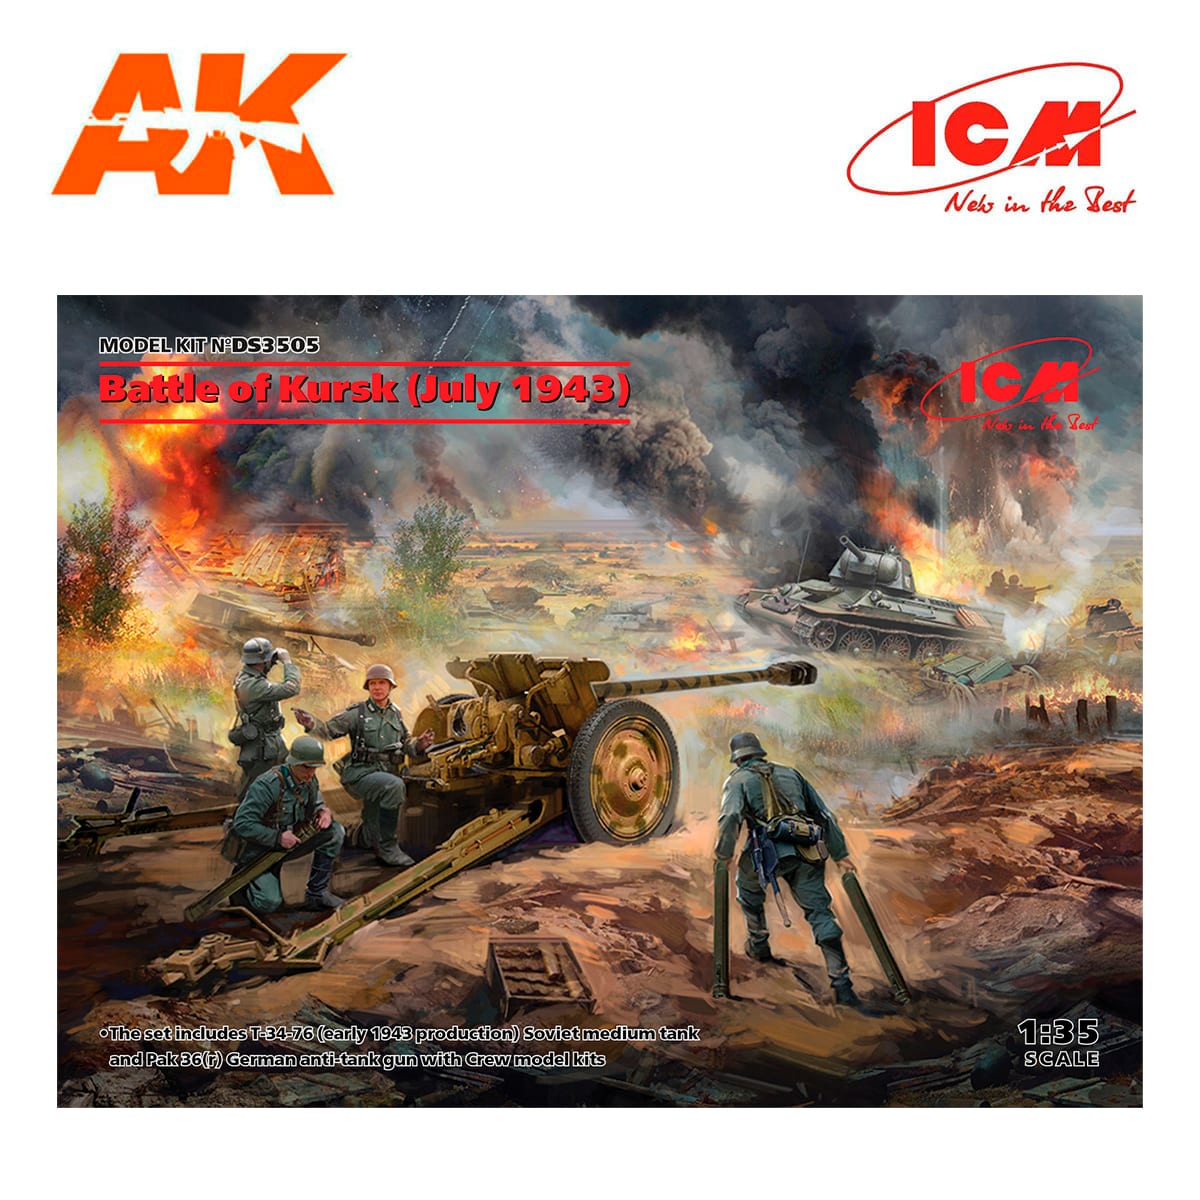 Battle of Kursk (July 1943) (T-34-76 (early 1943), Pak 36(r ) with Crew (4 figures)) 1/35